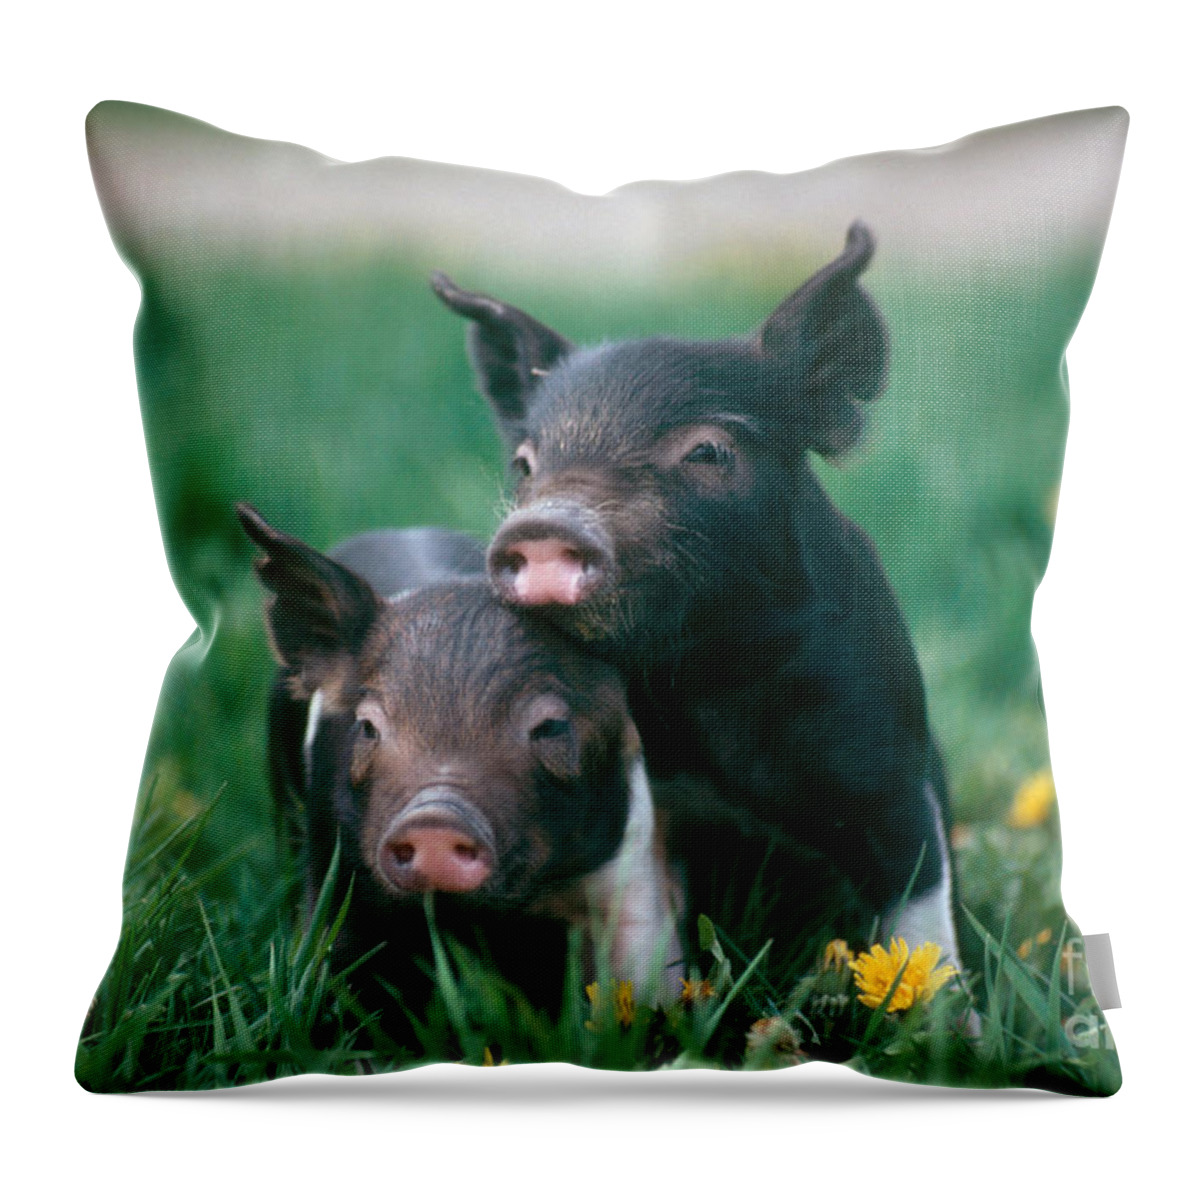 Nature Throw Pillow featuring the photograph Domestic Piglets by Alan Carey